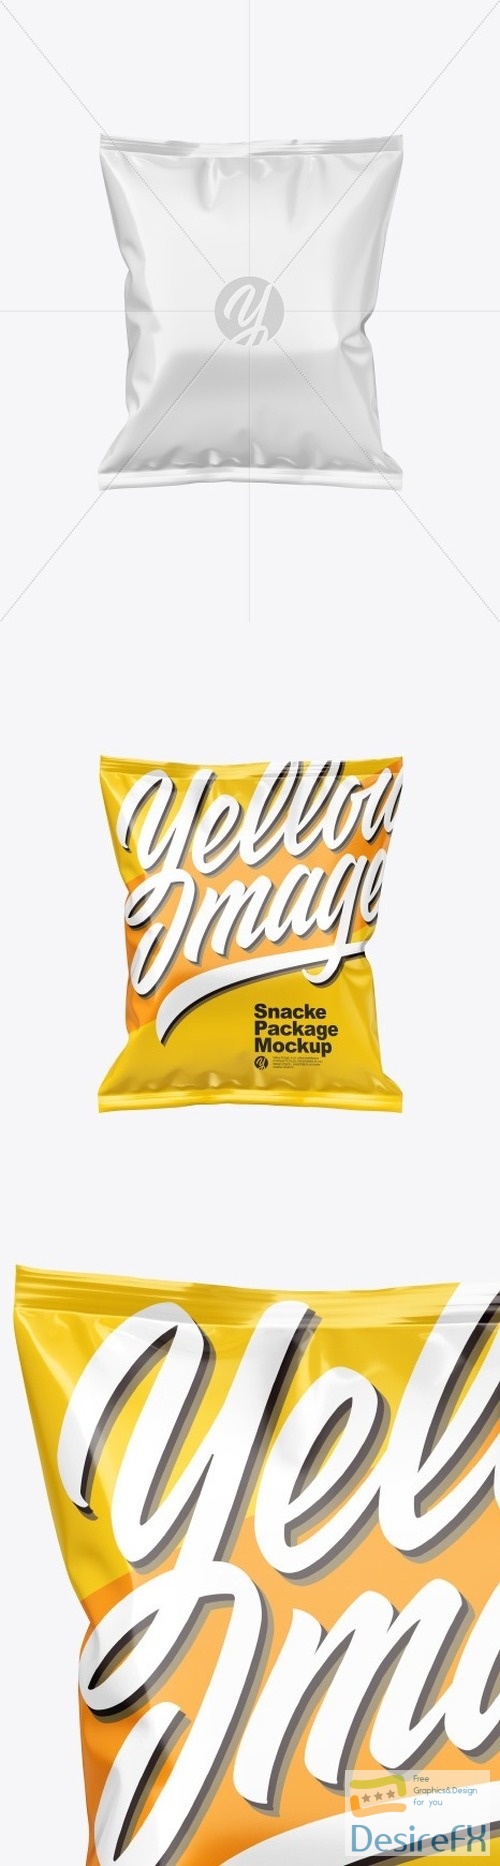 Glossy Snack Package Mockup 51697